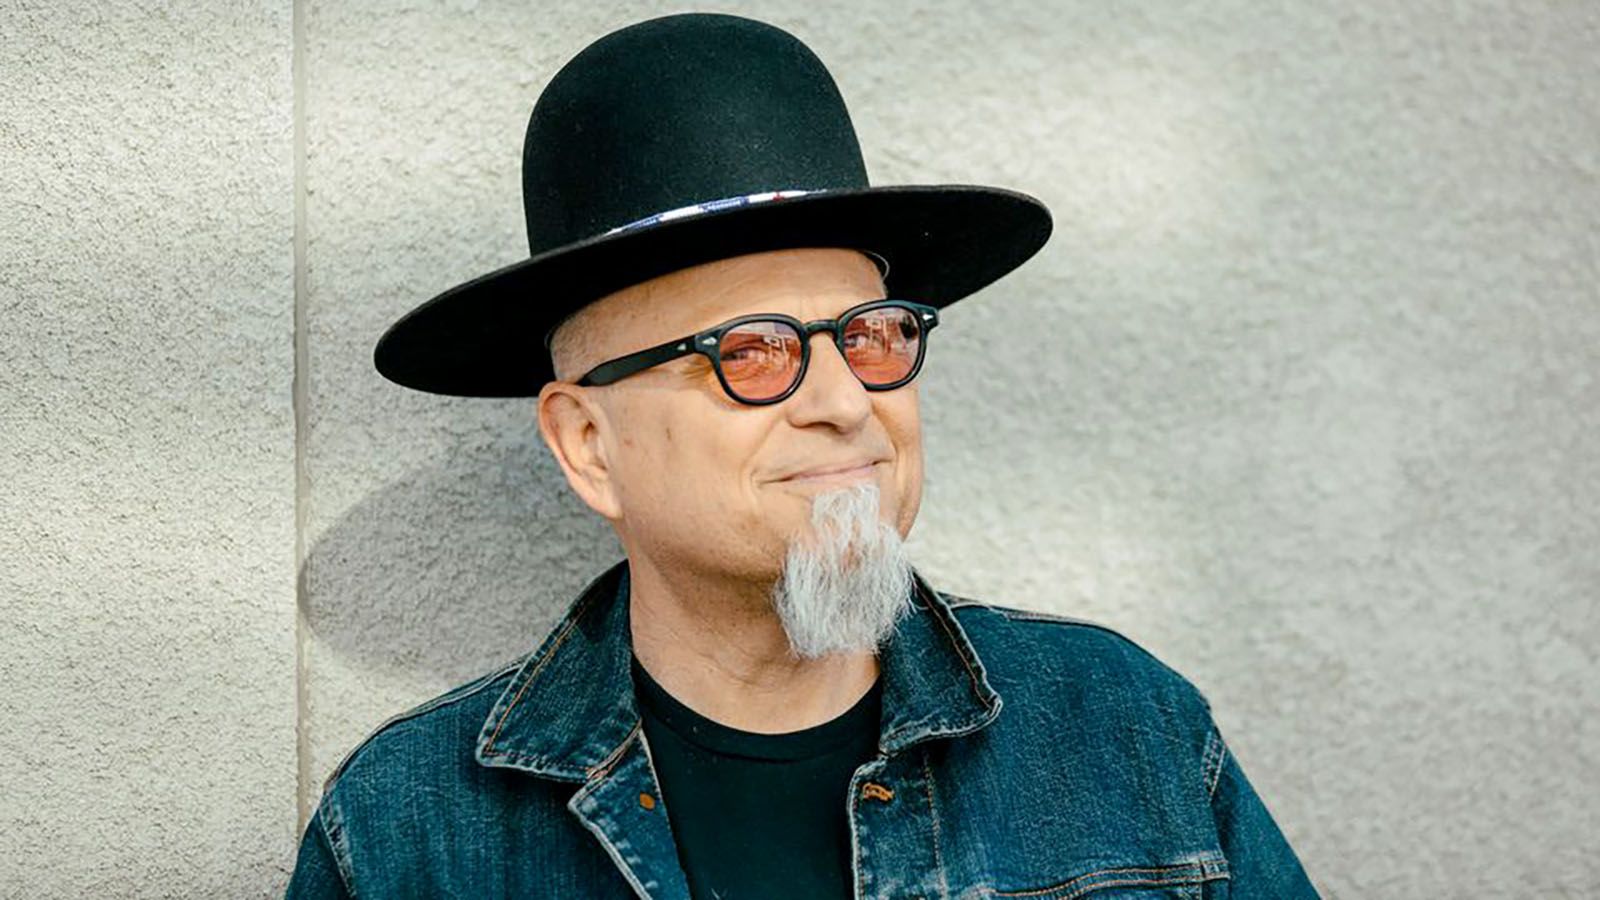 Bobcat Goldthwait will be at Summit City Comedy Club on July 22 and 23.